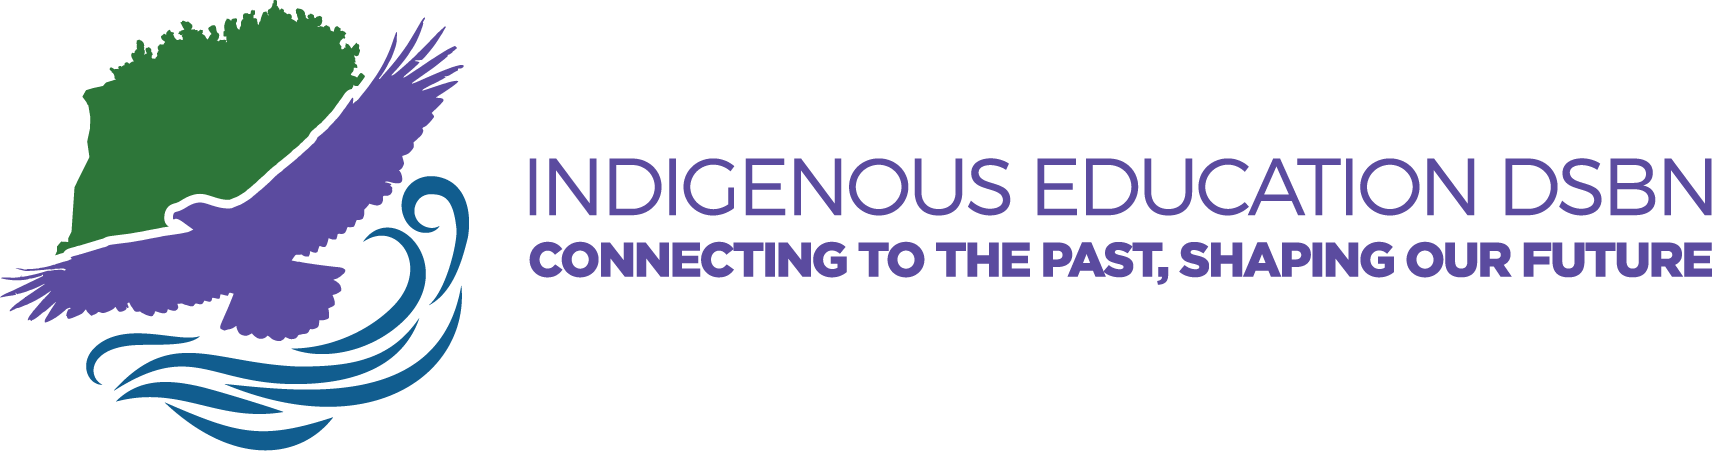 Indigenous Education DSBN connecting to the past, shaping our future